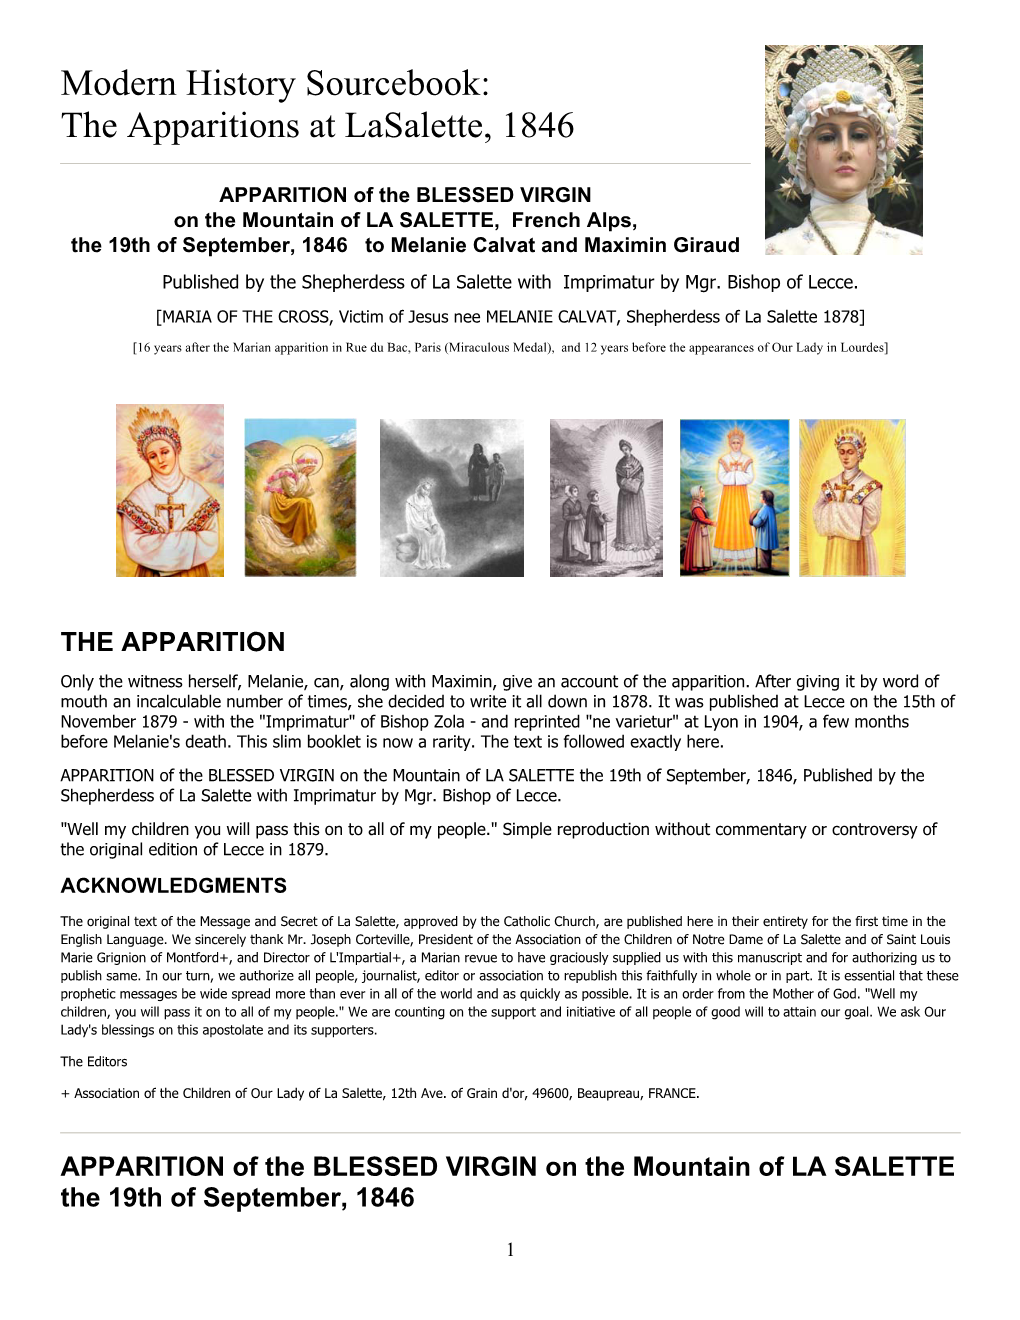 Modern History Sourcebook: the Apparitions at Lasalette, 1846